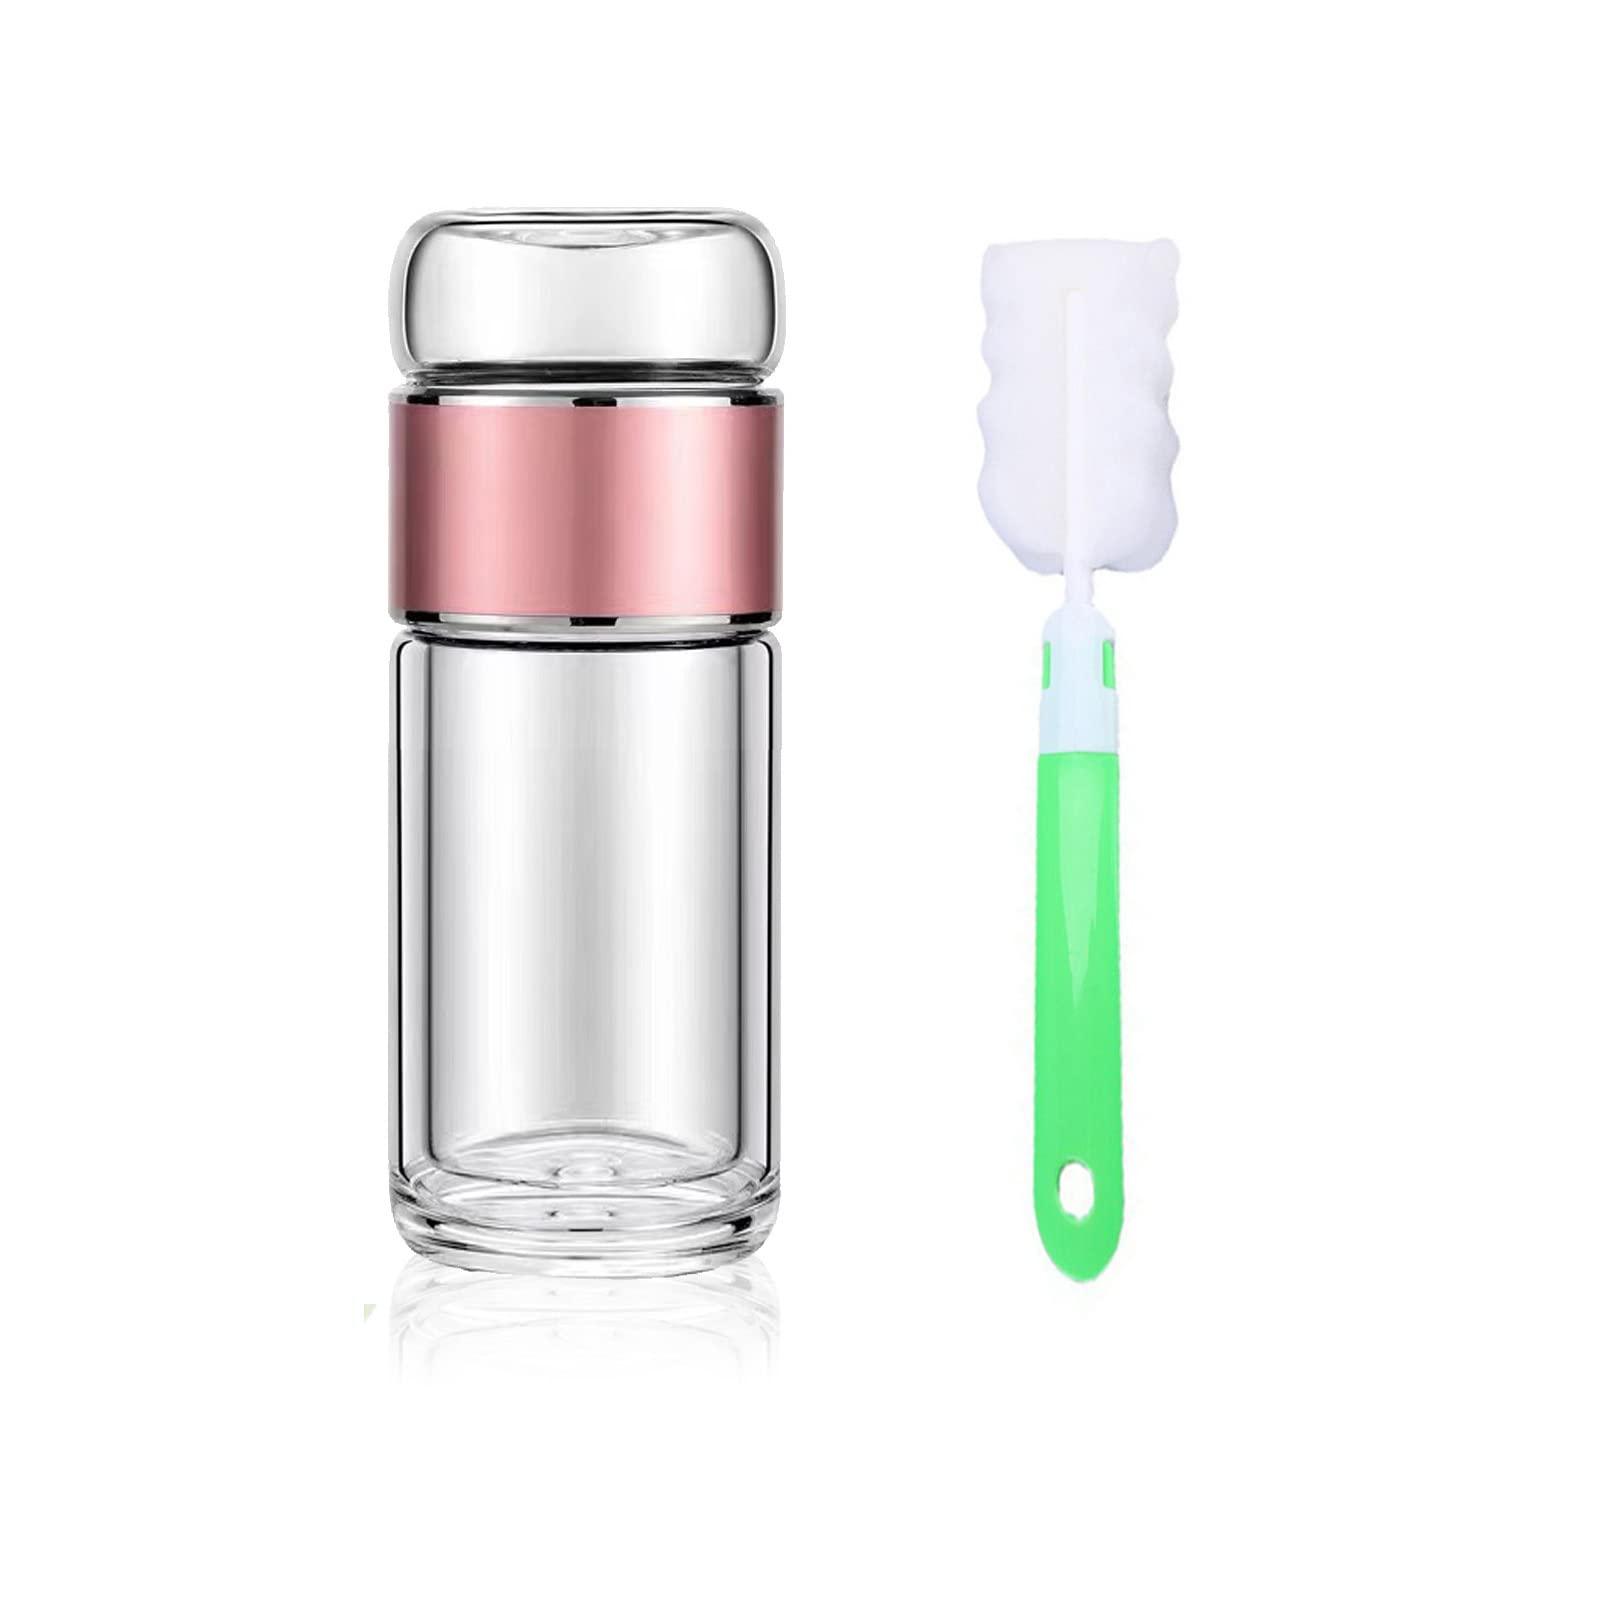 Snminetal Double Wall Glass Tea Bottle - Bubble Flower Tea Drinking Water Bottle - With Filter And Small Tea Cup,Suitable For Work Office, Car, Home,As a Gift,Etc Portable Water Bottle14oz (Pink)